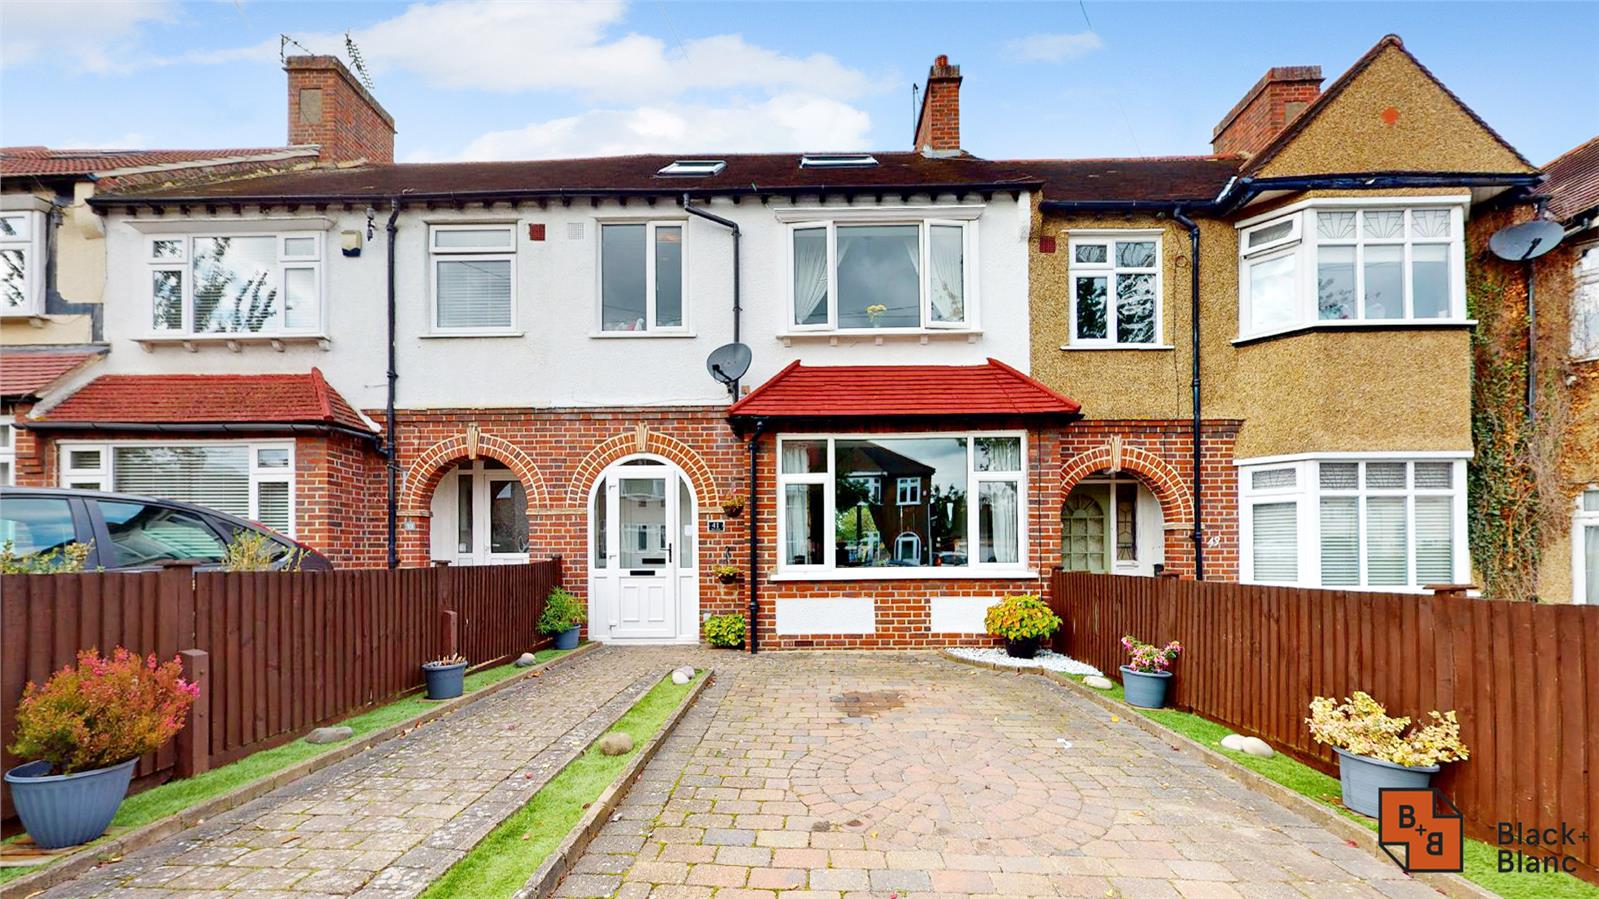 4 bed house for sale in Rose Walk, West Wickham - Property Image 1